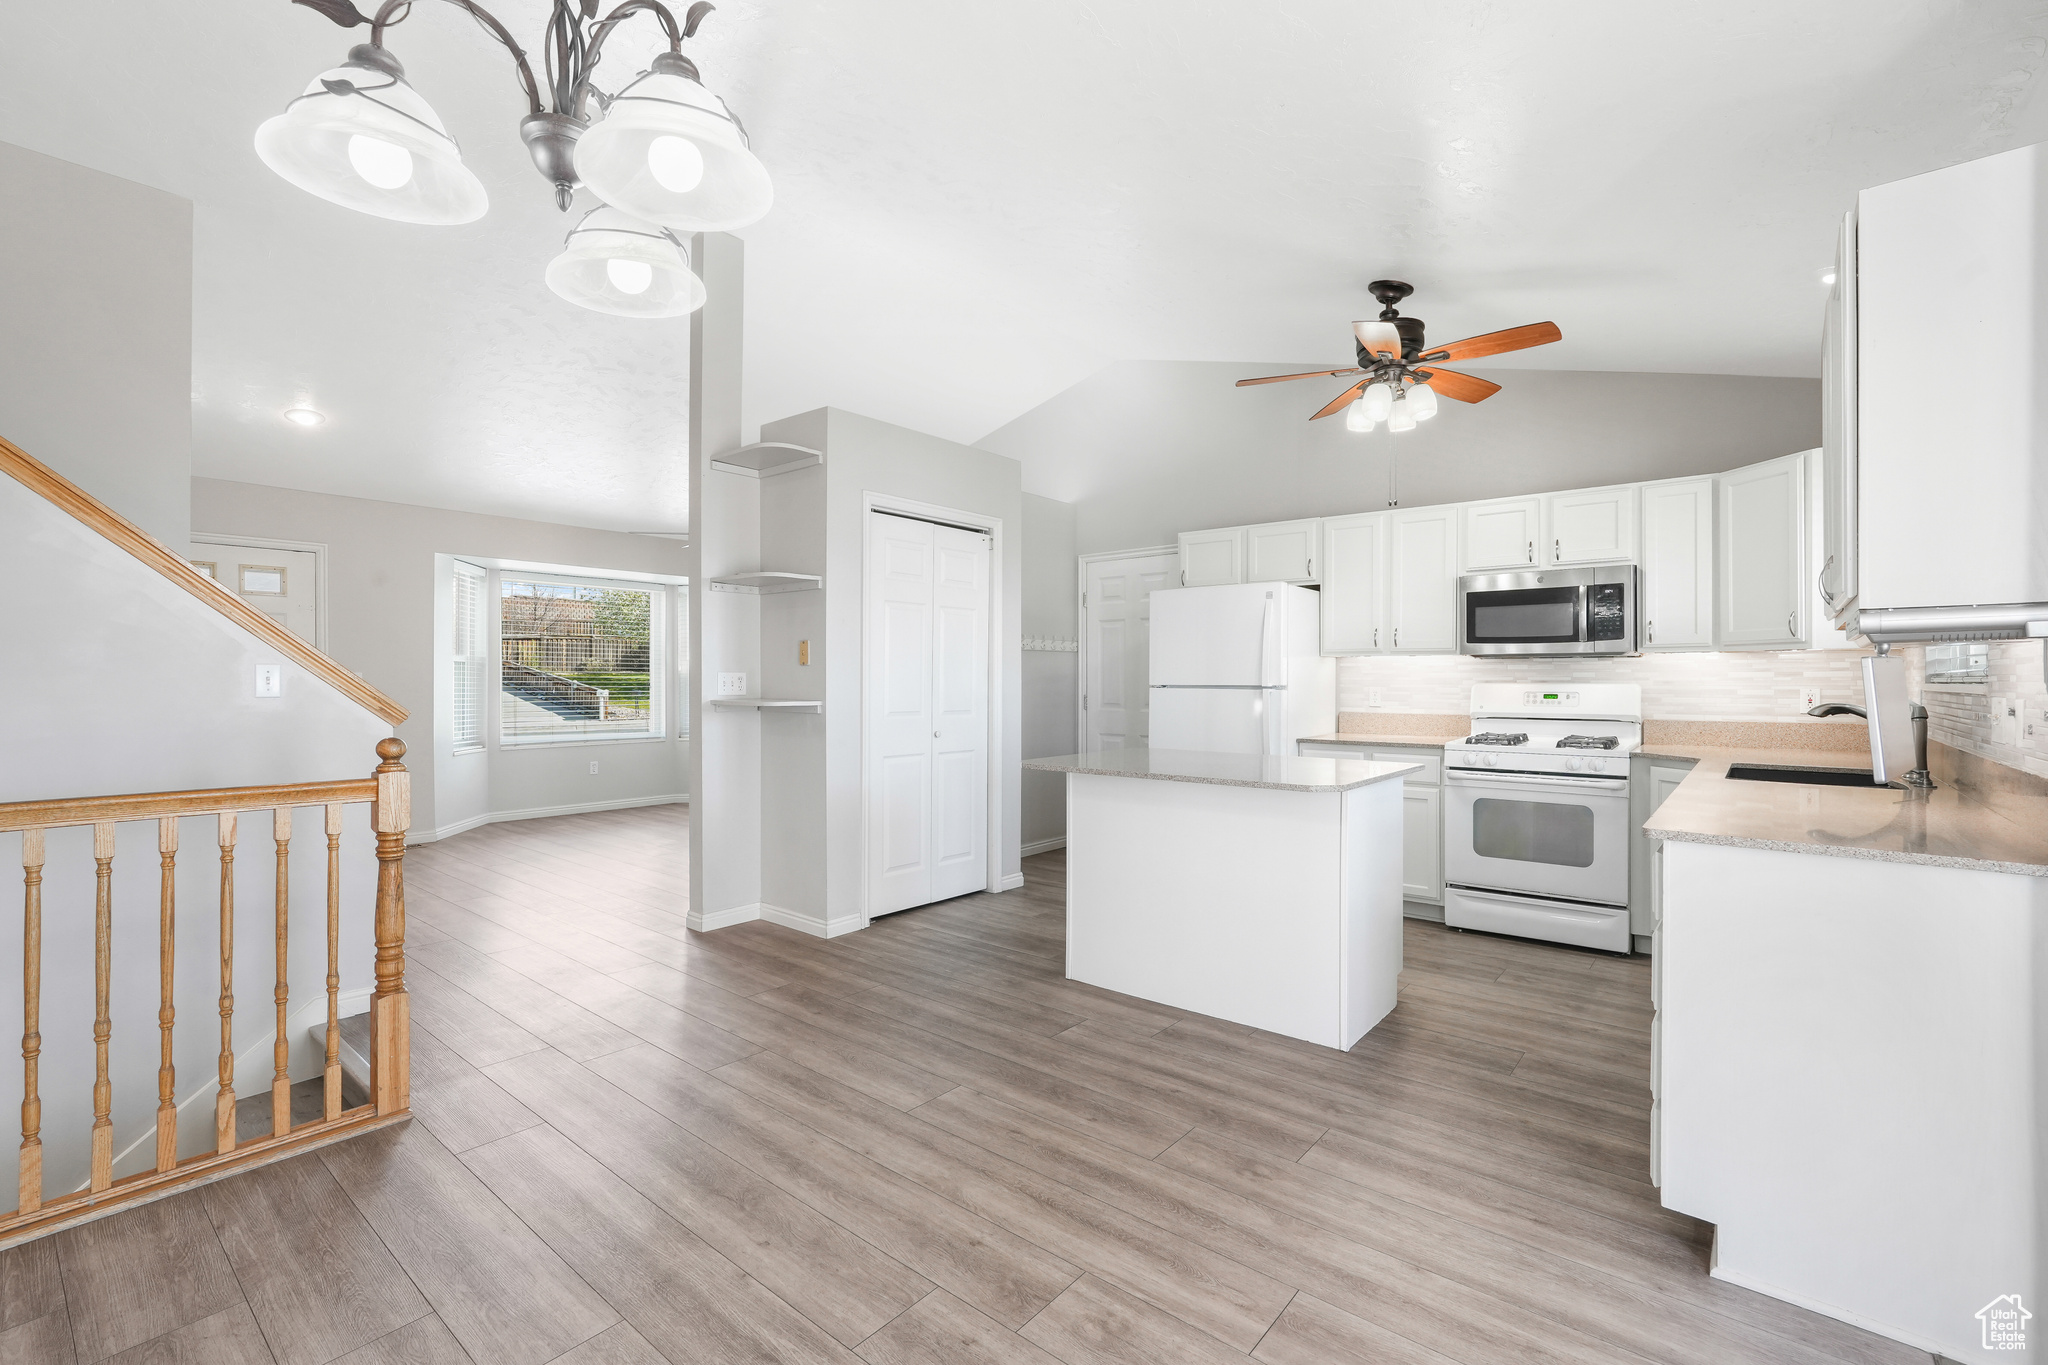 Kitchen featuring lofted ceiling, white appliances, backsplash, and light wood-type flooring